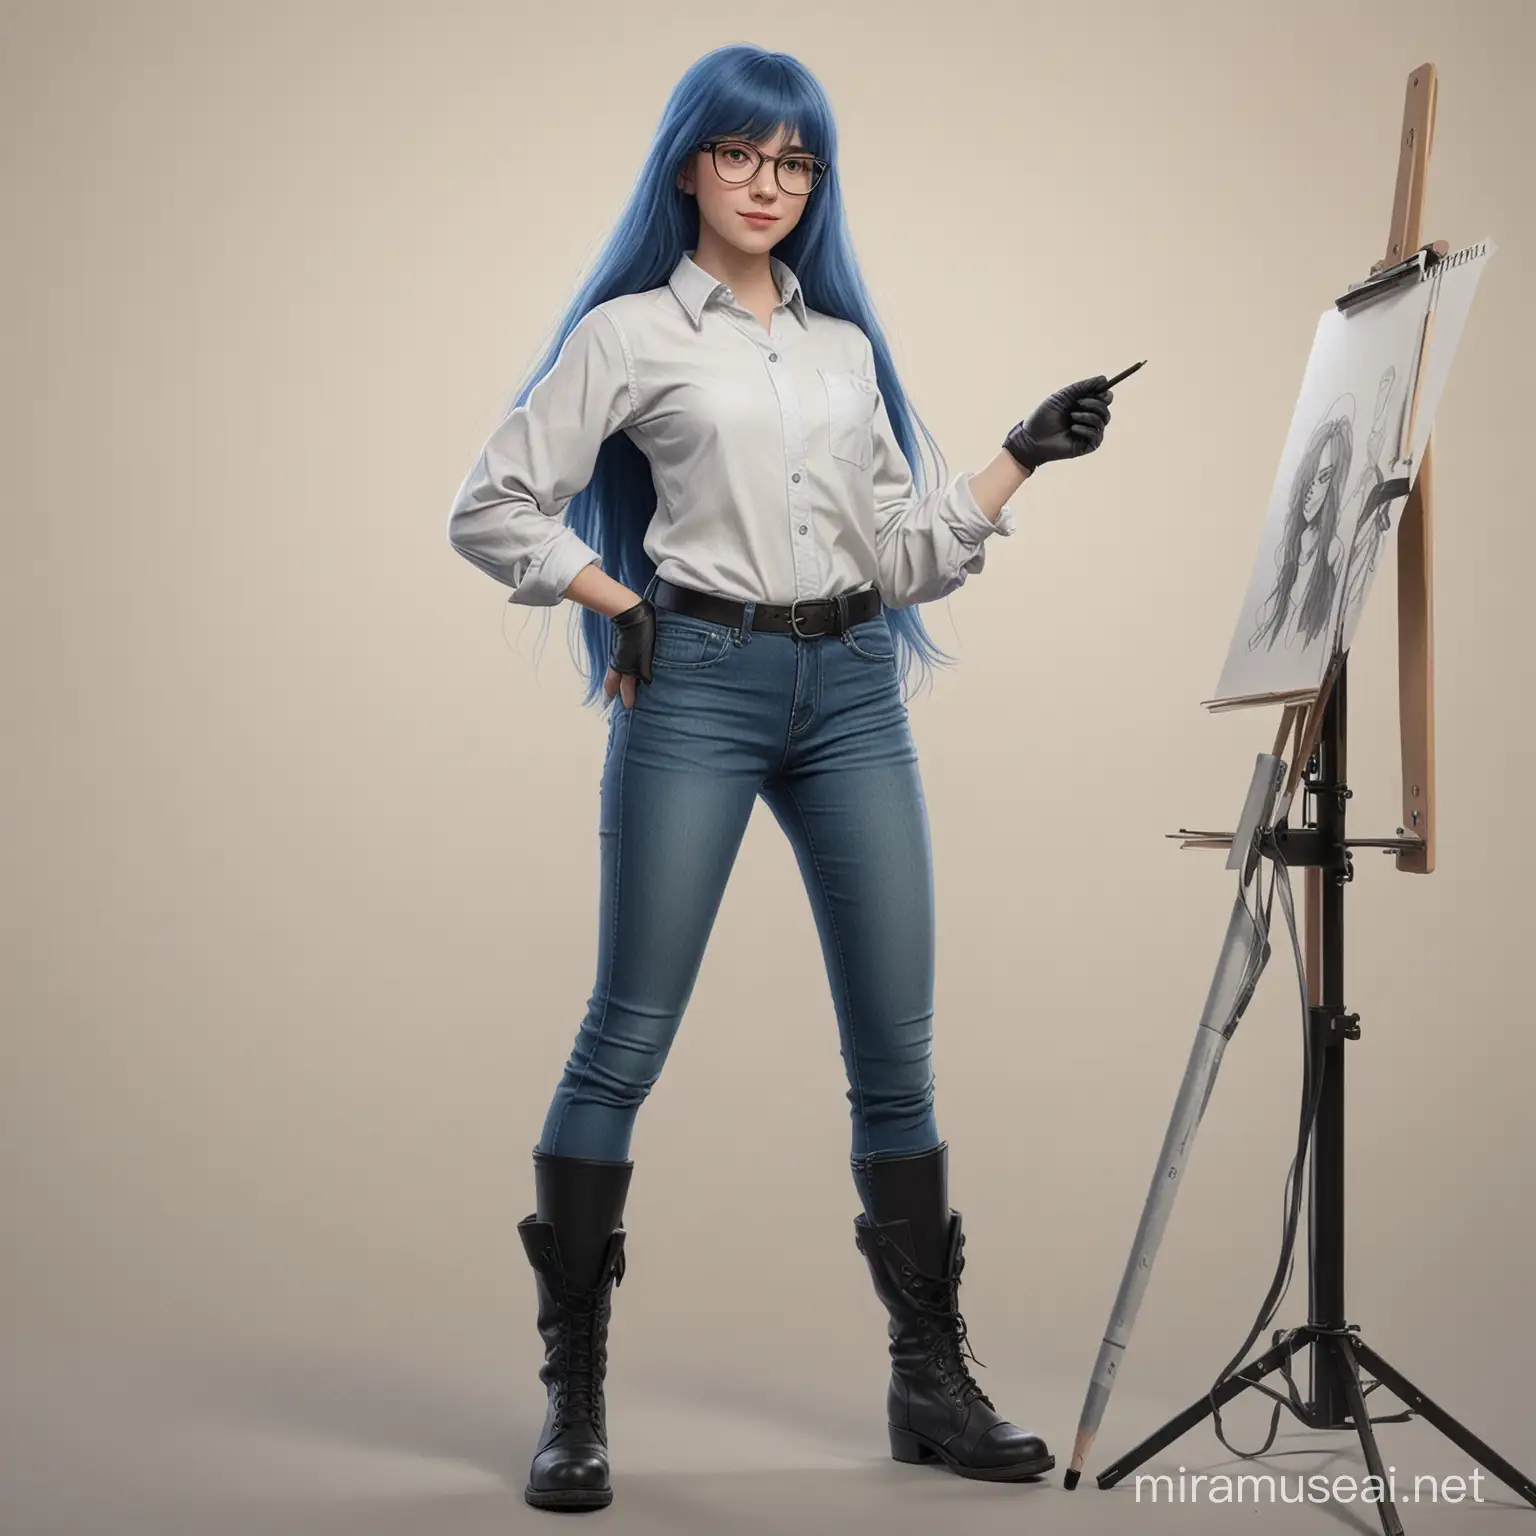 BlueHaired Animation Student Drawing Digital Art with Glove and Pencil